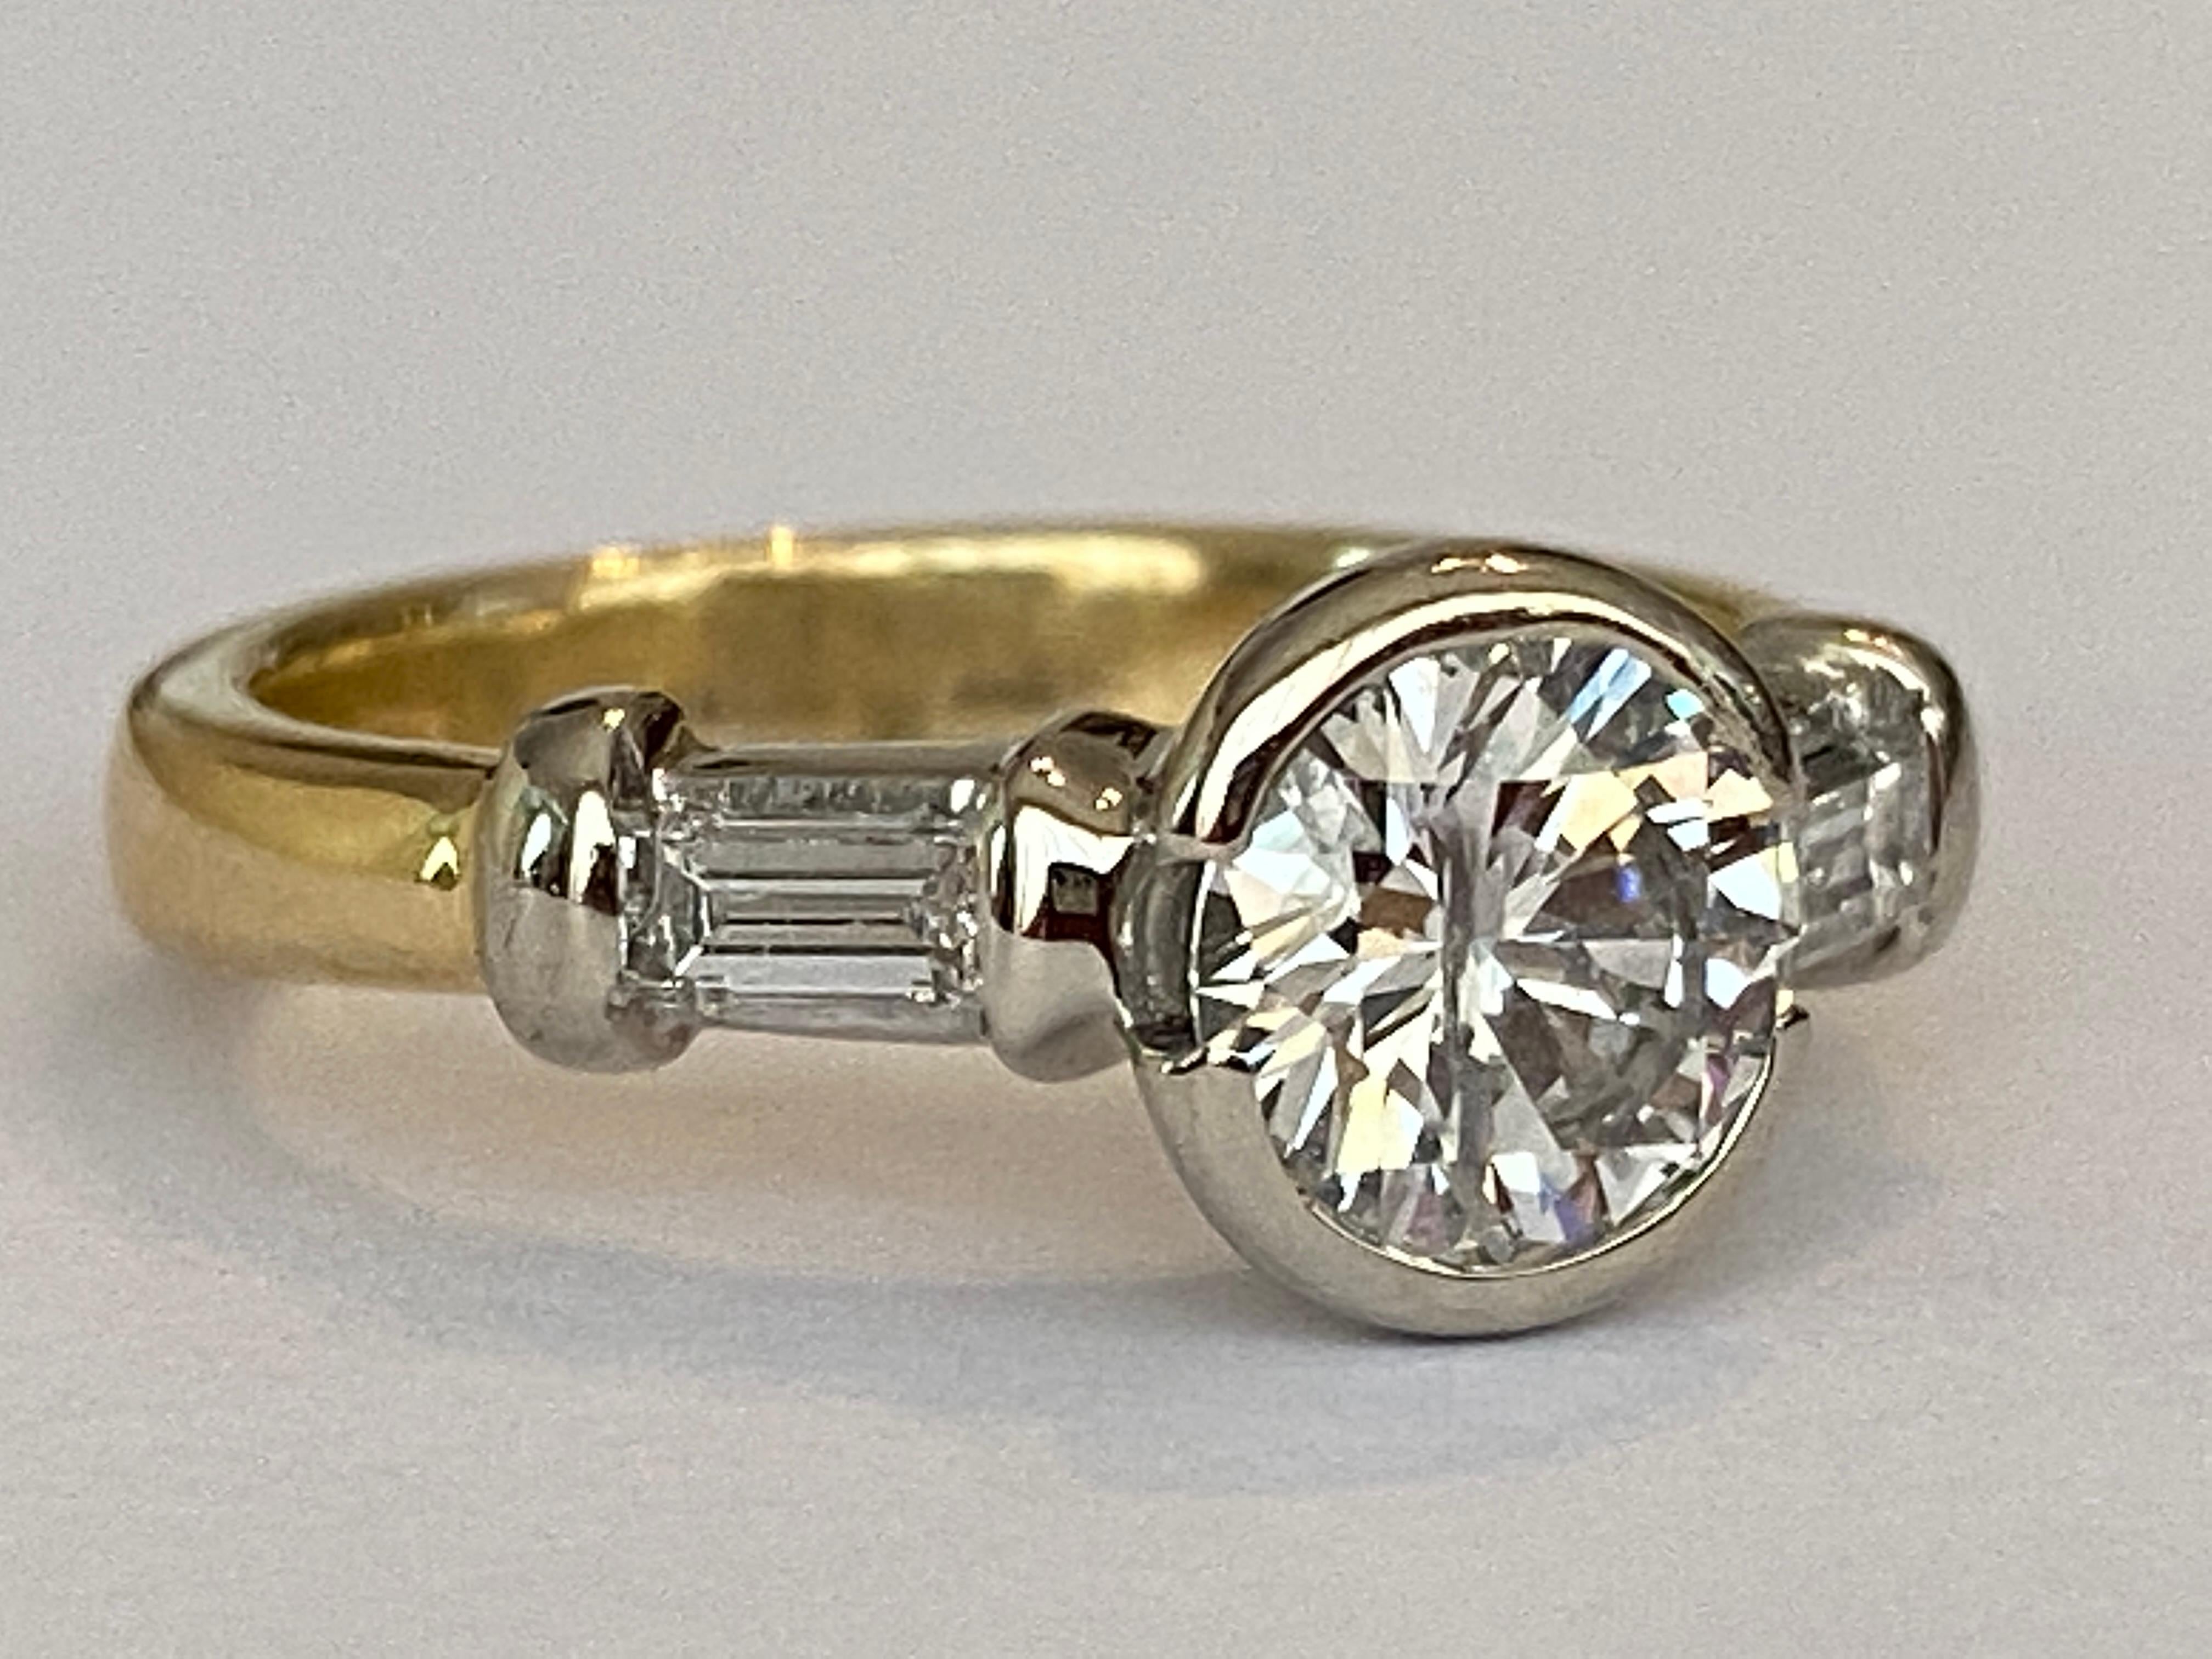 Contemporary GEM Certificied 1.60 Carat Diamond Engagement Ring For Sale